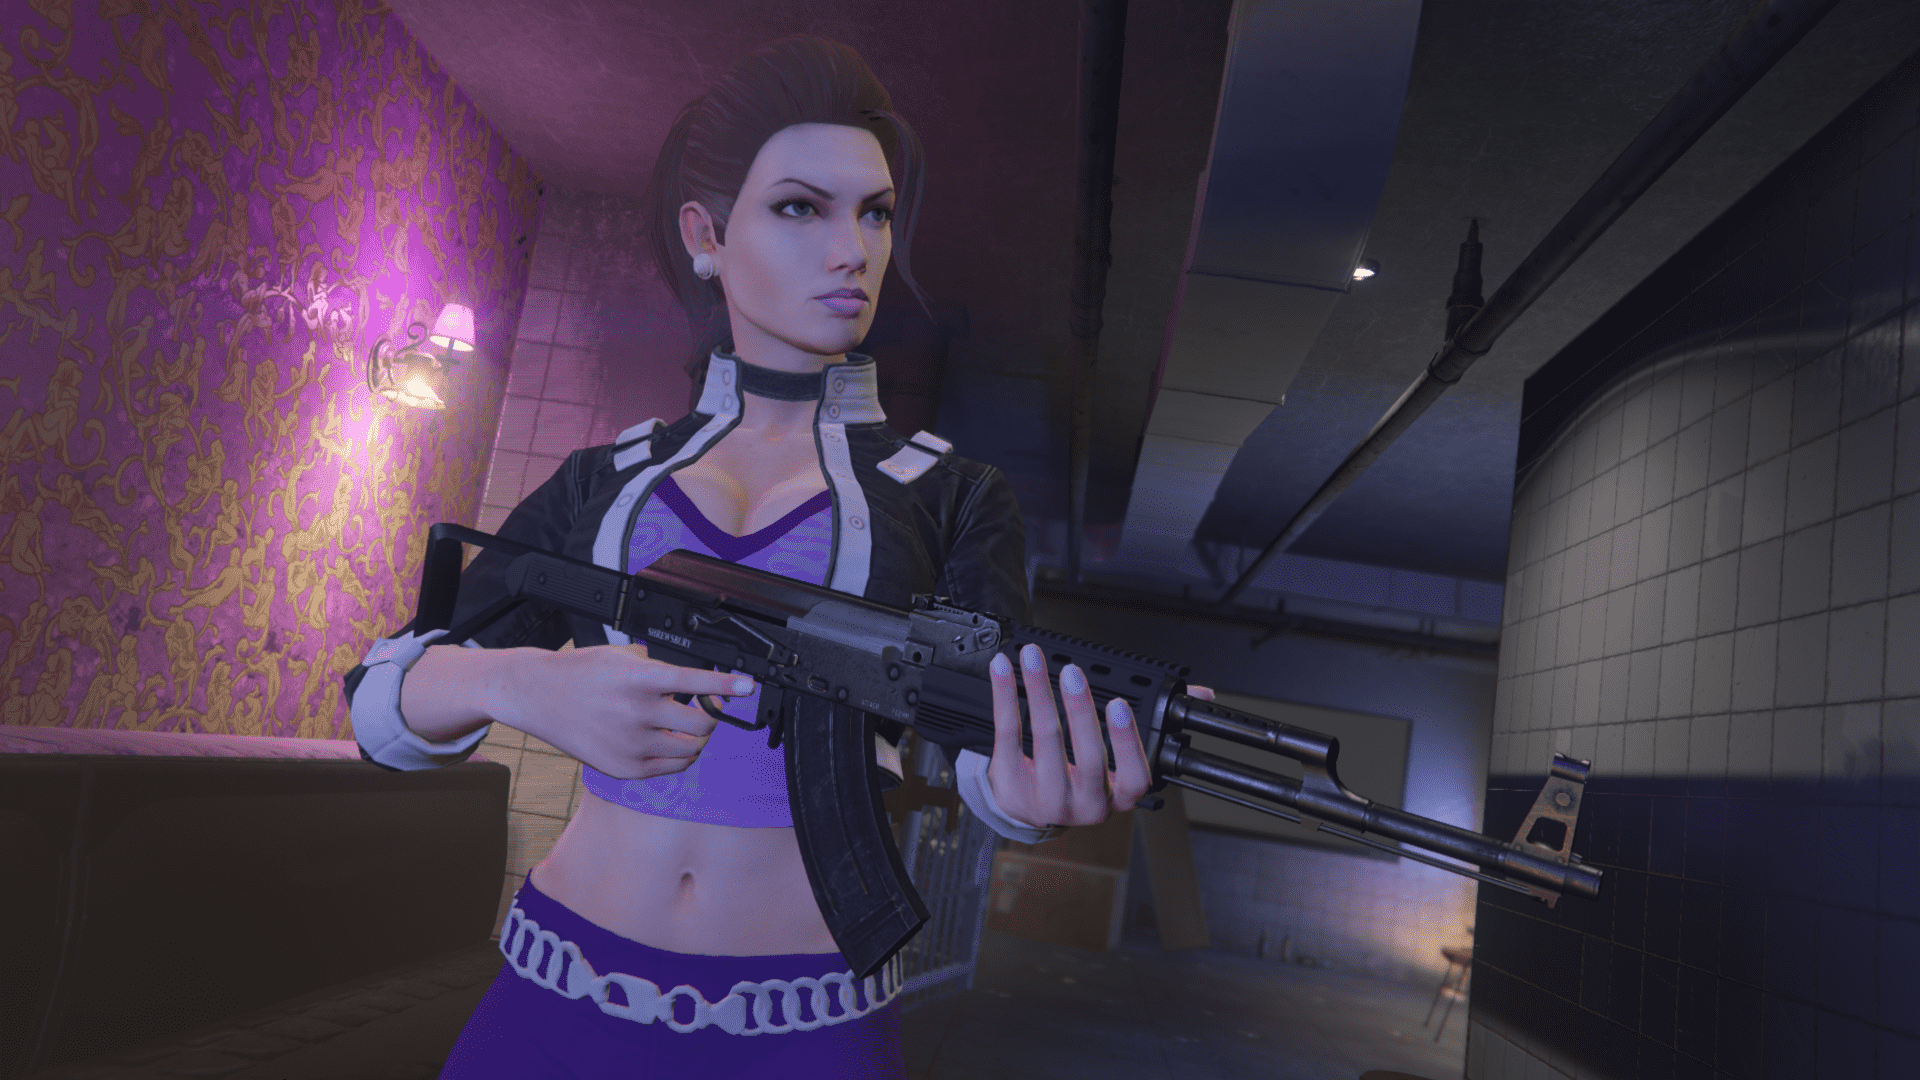 anna wing recommends Shaundi Saints Row 3